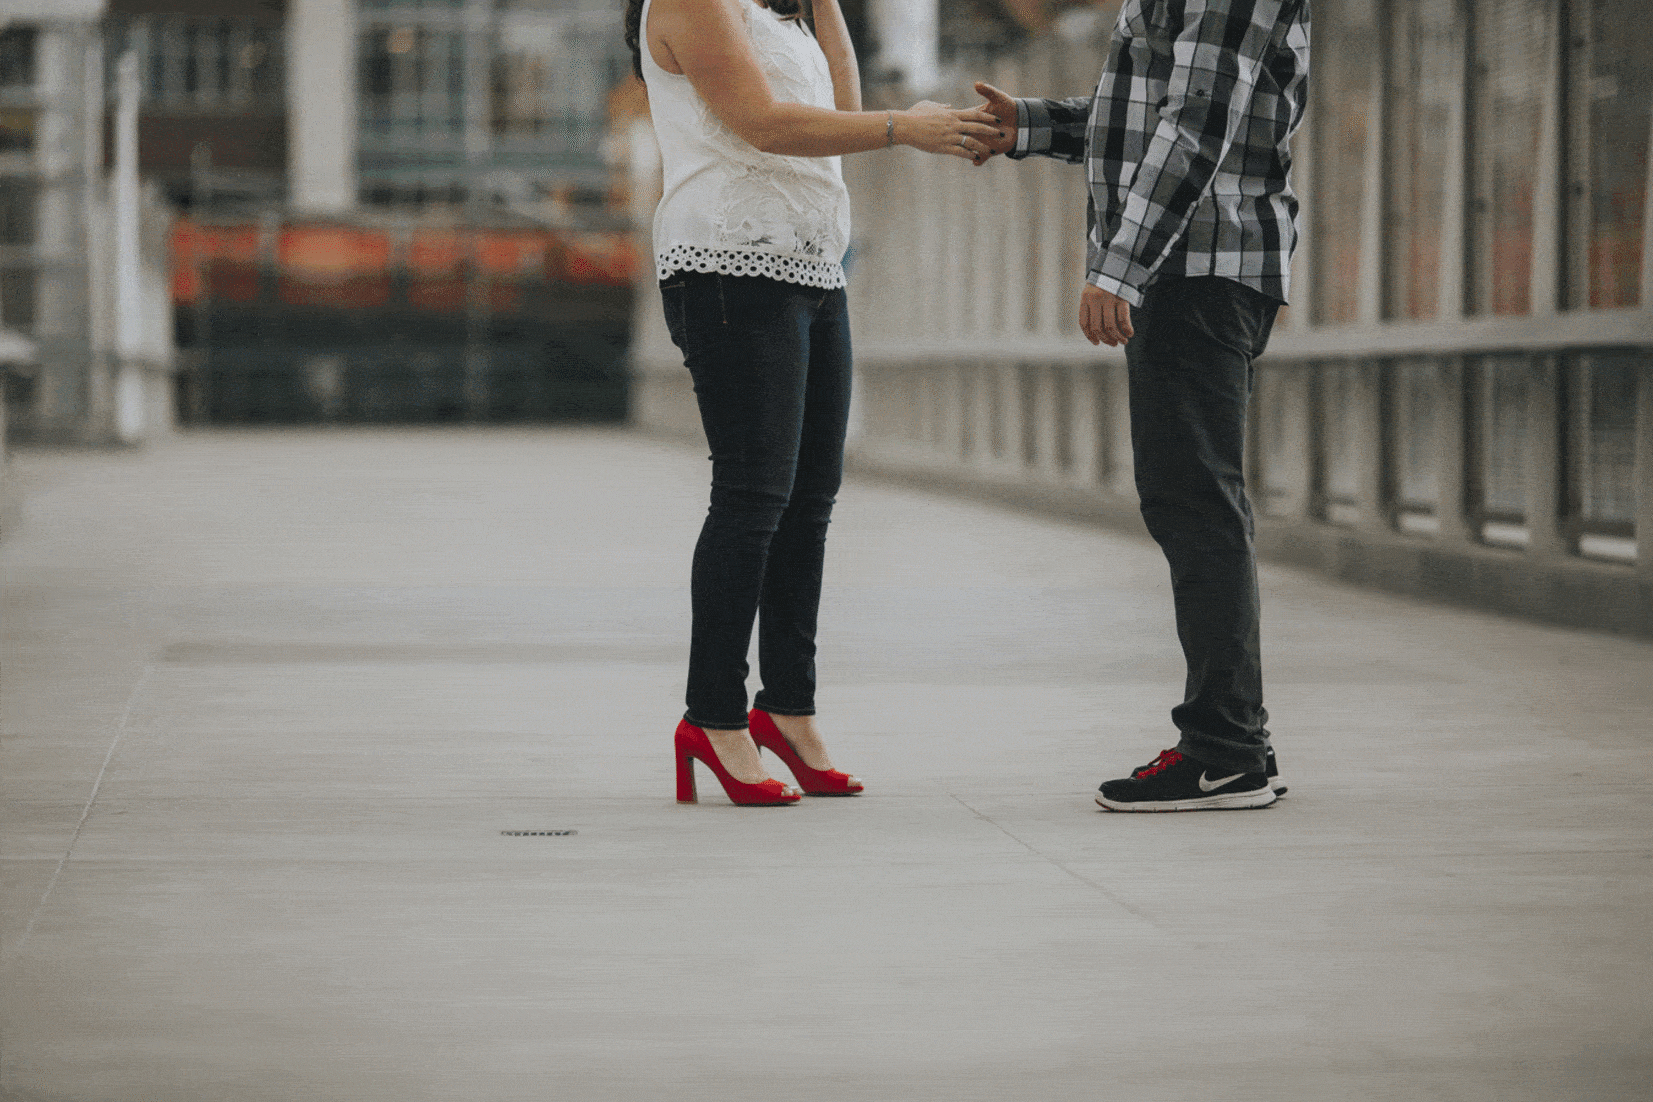 twirling gif, red shoes engagement